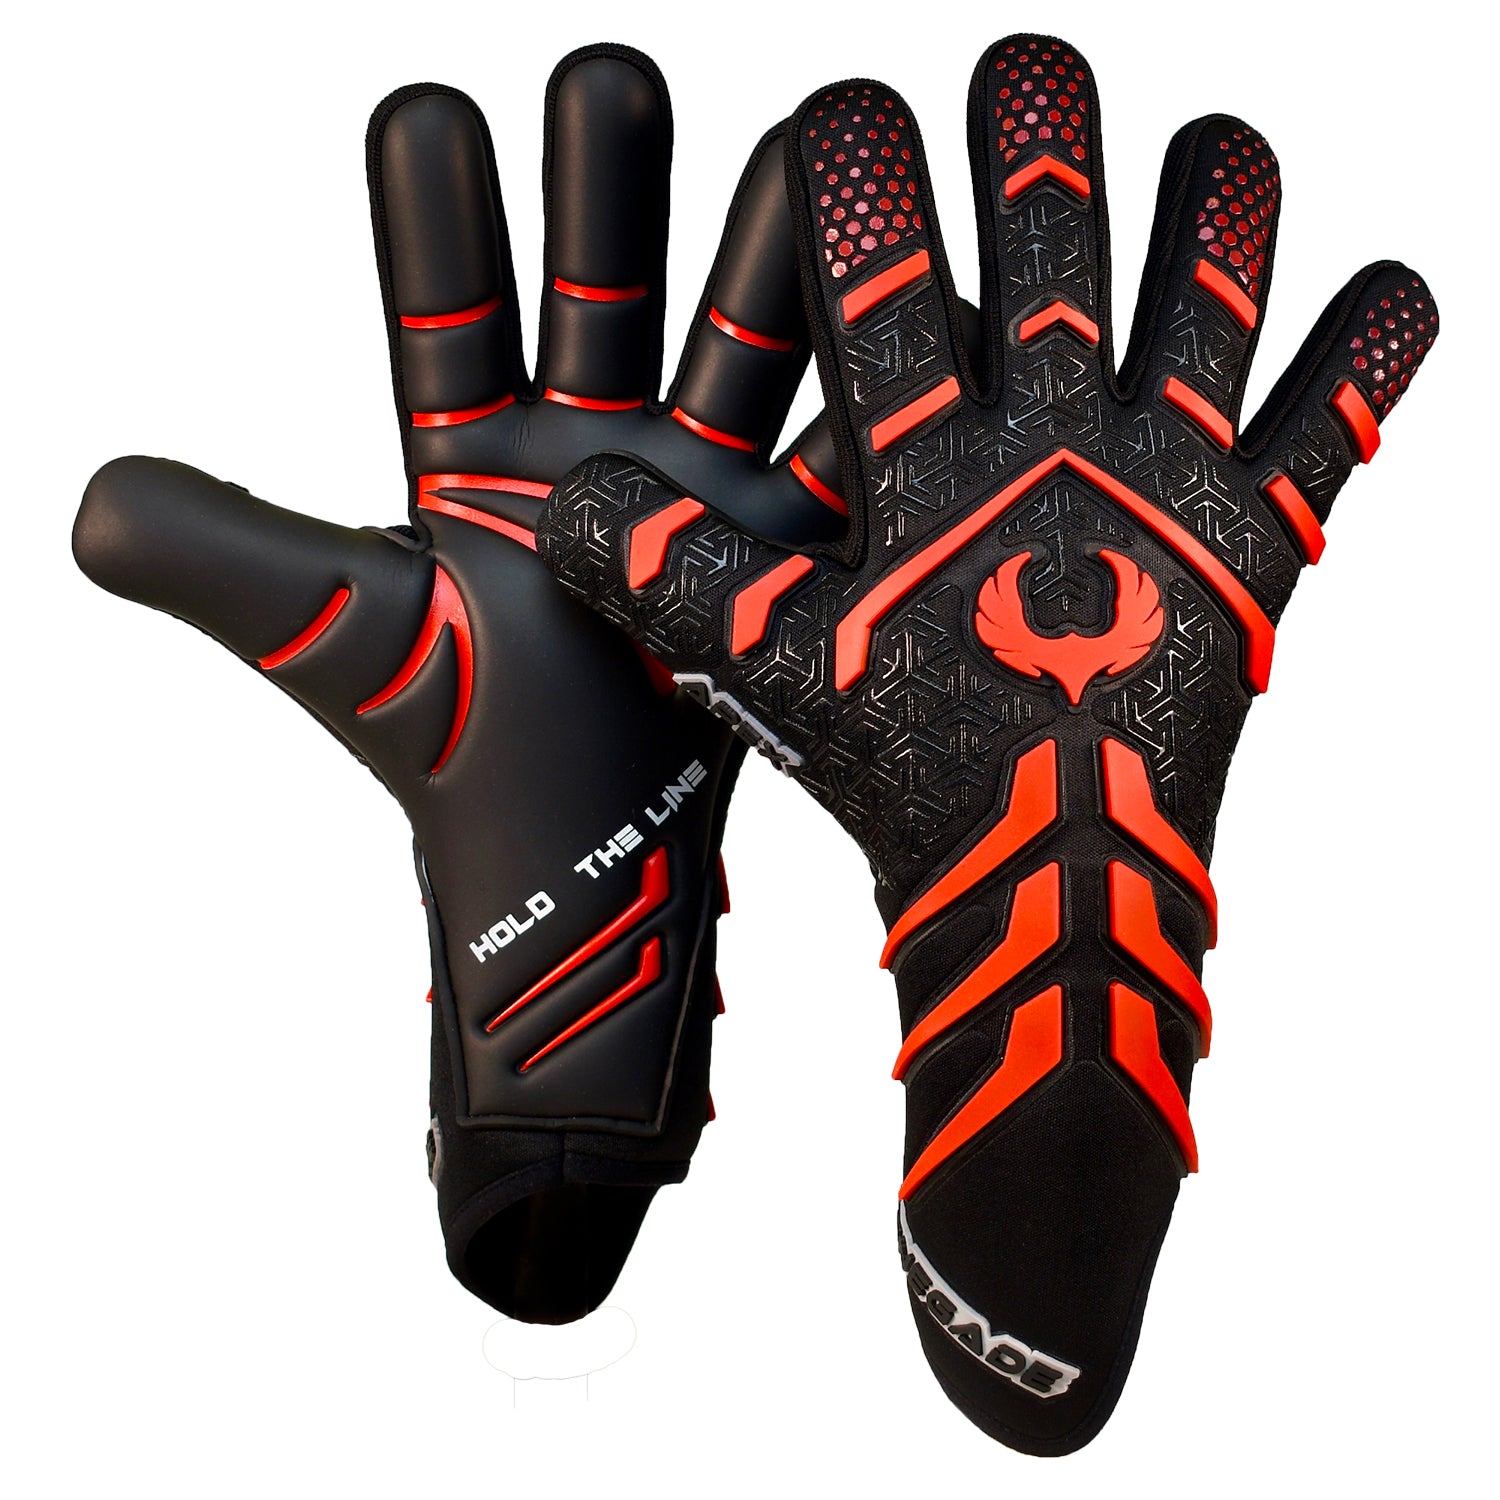  Renegade GK Apex Afterburn Professional Strapless Goalie Gloves, 4mm EXT Contact Grip